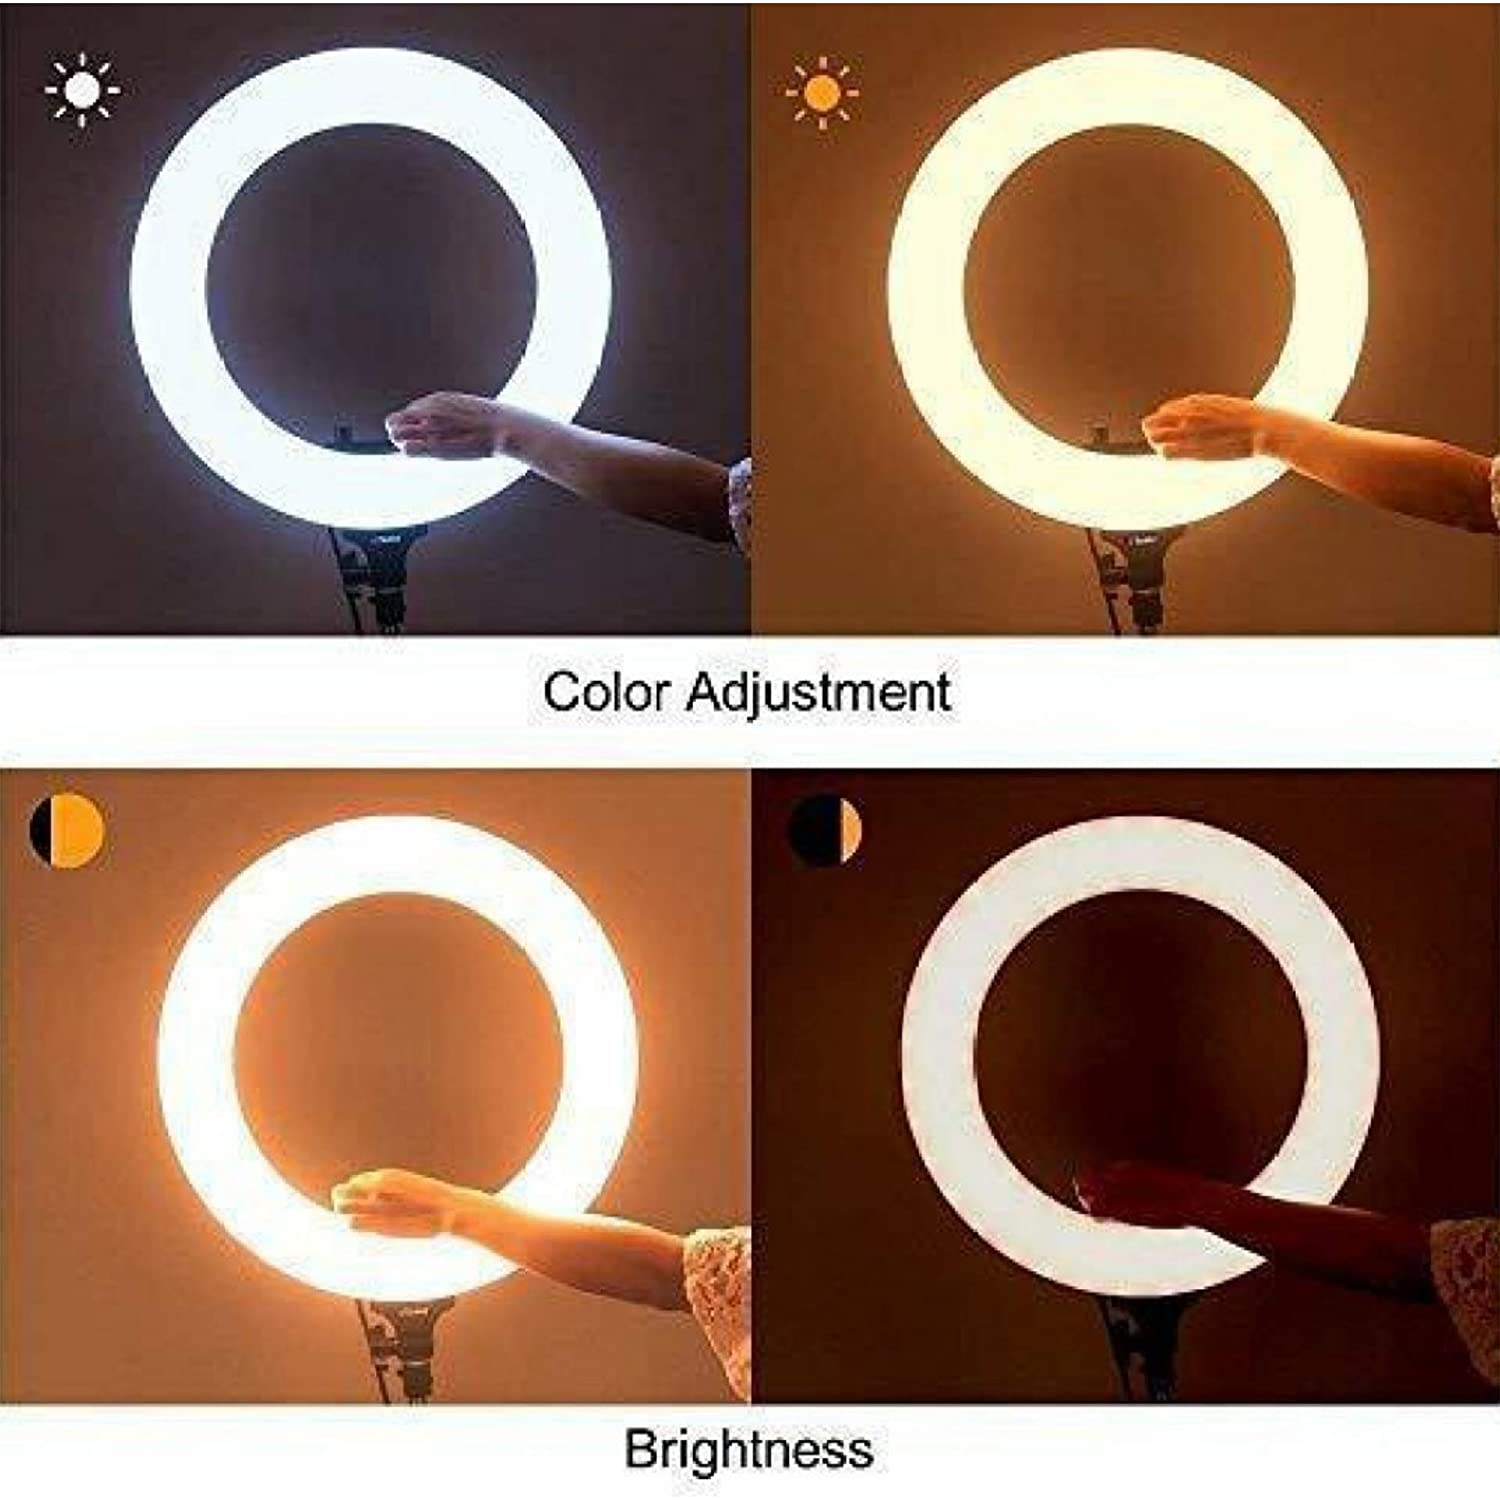 Ring Light Hd Backgroung Picsart (4) Total PNG | Free Stock Photos